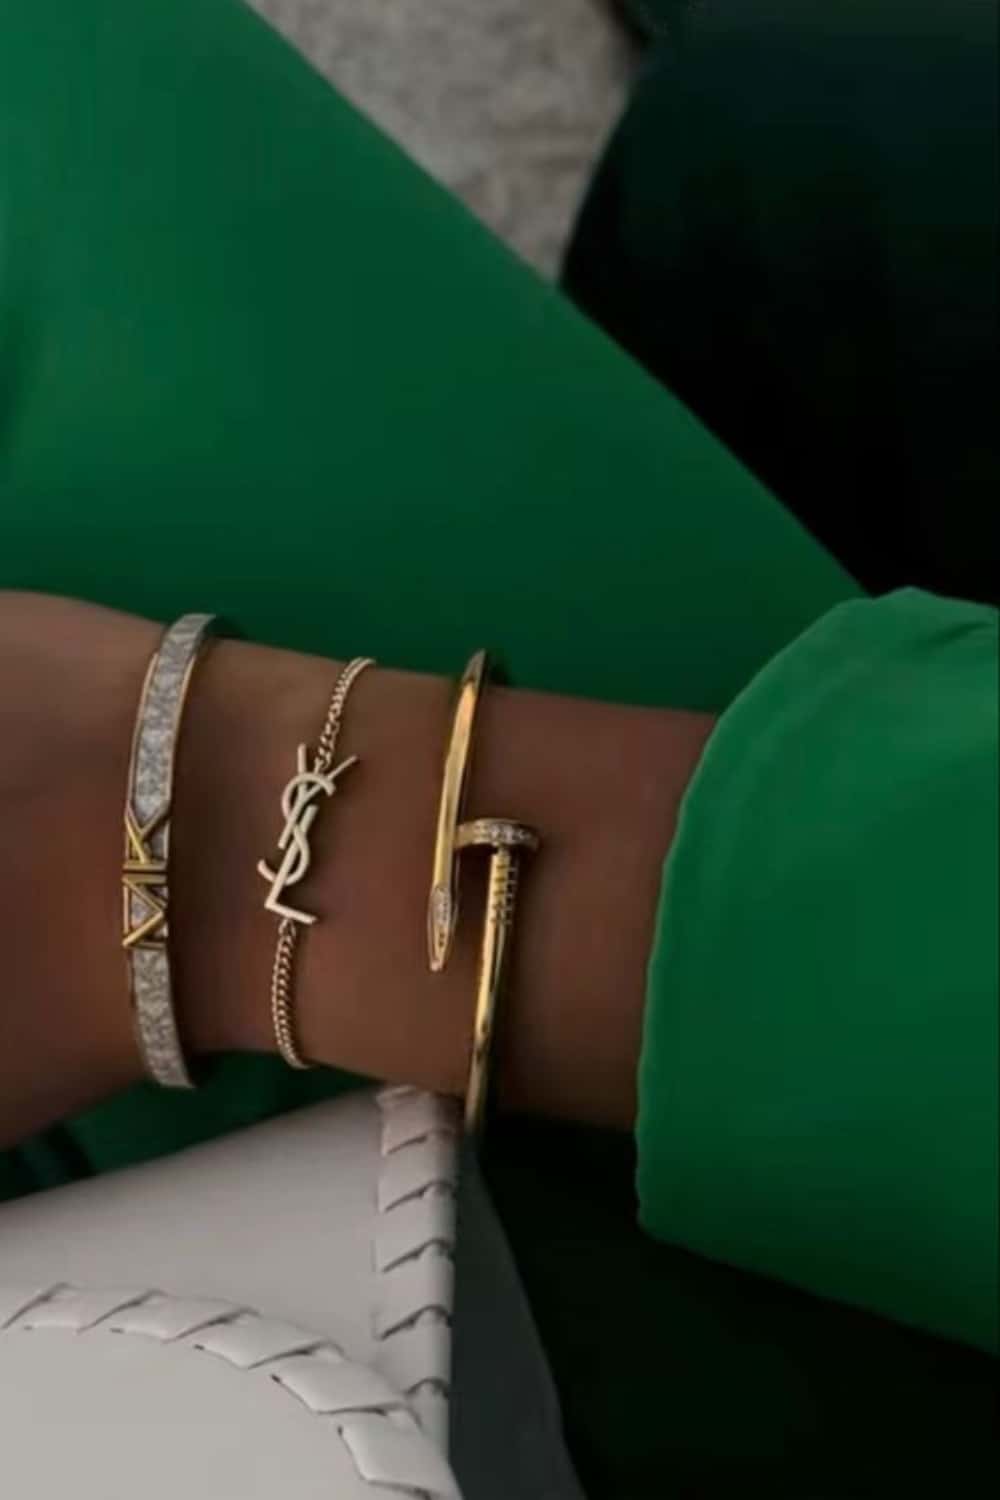 How to stack bracelets casually - pair different shapes